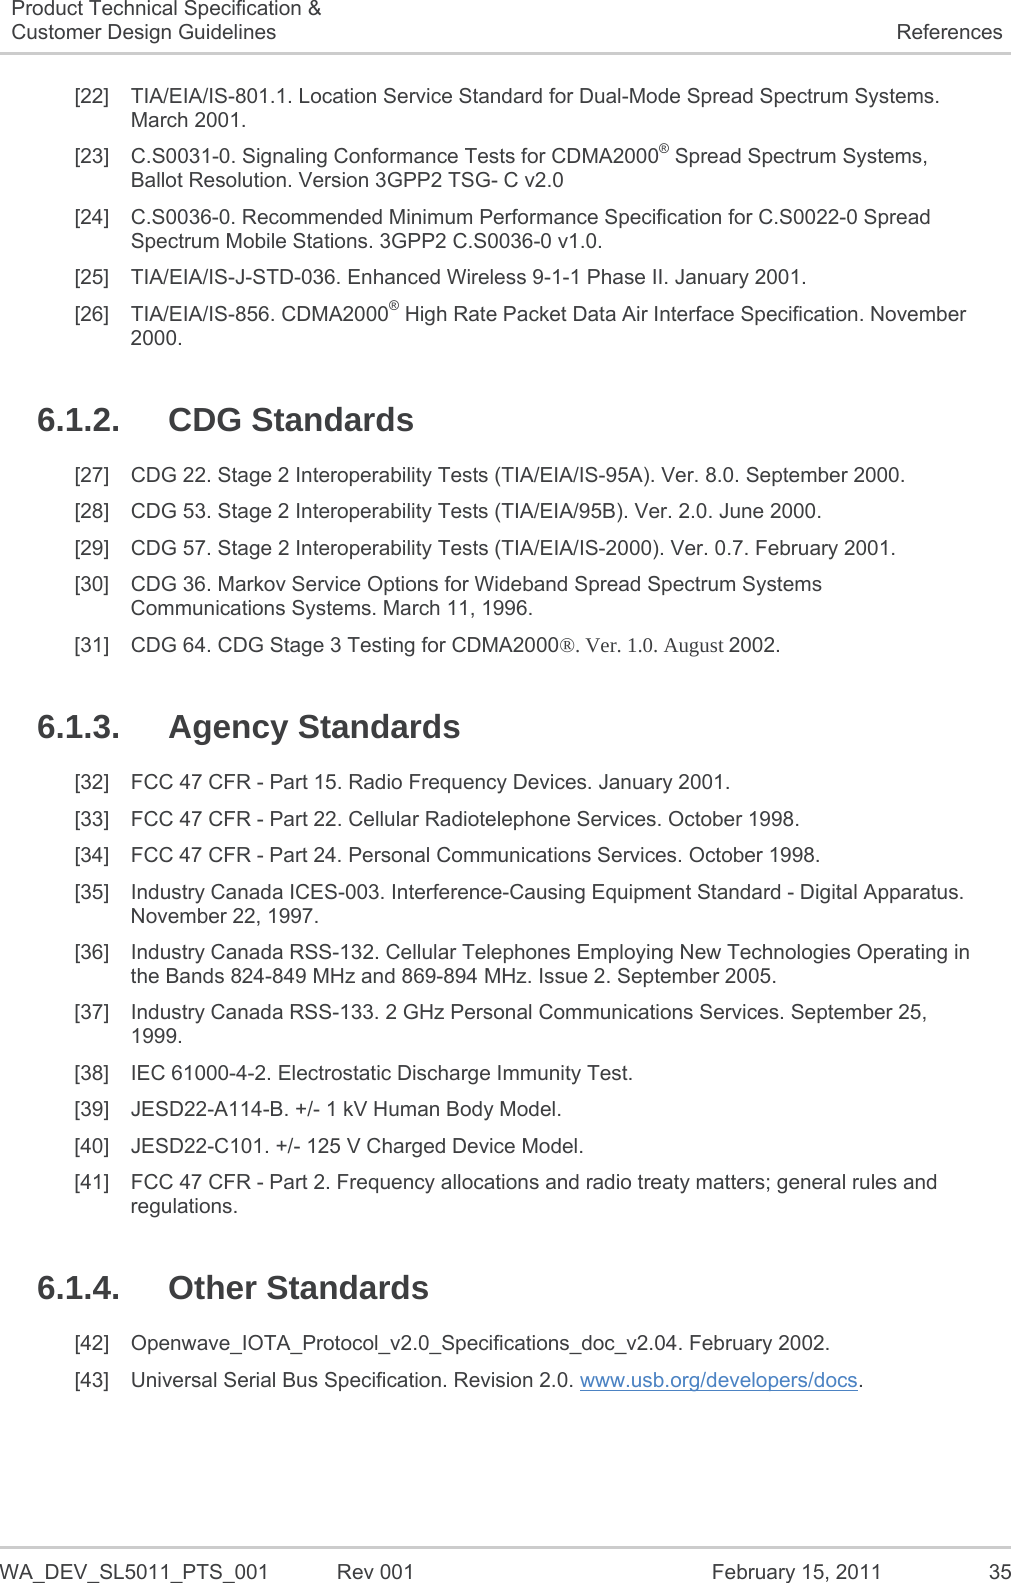   WA_DEV_SL5011_PTS_001  Rev 001  February 15, 2011  35 Product Technical Specification &amp; Customer Design Guidelines  References [22] TIA/EIA/IS-801.1. Location Service Standard for Dual-Mode Spread Spectrum Systems. March 2001. [23]  C.S0031-0. Signaling Conformance Tests for CDMA2000® Spread Spectrum Systems, Ballot Resolution. Version 3GPP2 TSG- C v2.0 [24]  C.S0036-0. Recommended Minimum Performance Specification for C.S0022-0 Spread Spectrum Mobile Stations. 3GPP2 C.S0036-0 v1.0. [25] TIA/EIA/IS-J-STD-036. Enhanced Wireless 9-1-1 Phase II. January 2001. [26] TIA/EIA/IS-856. CDMA2000® High Rate Packet Data Air Interface Specification. November 2000. 6.1.2. CDG Standards [27]  CDG 22. Stage 2 Interoperability Tests (TIA/EIA/IS-95A). Ver. 8.0. September 2000. [28]  CDG 53. Stage 2 Interoperability Tests (TIA/EIA/95B). Ver. 2.0. June 2000. [29]  CDG 57. Stage 2 Interoperability Tests (TIA/EIA/IS-2000). Ver. 0.7. February 2001. [30]  CDG 36. Markov Service Options for Wideband Spread Spectrum Systems Communications Systems. March 11, 1996. [31]  CDG 64. CDG Stage 3 Testing for CDMA2000®. Ver. 1.0. August 2002. 6.1.3. Agency Standards [32]  FCC 47 CFR - Part 15. Radio Frequency Devices. January 2001. [33]  FCC 47 CFR - Part 22. Cellular Radiotelephone Services. October 1998. [34]  FCC 47 CFR - Part 24. Personal Communications Services. October 1998. [35]  Industry Canada ICES-003. Interference-Causing Equipment Standard - Digital Apparatus. November 22, 1997. [36]  Industry Canada RSS-132. Cellular Telephones Employing New Technologies Operating in the Bands 824-849 MHz and 869-894 MHz. Issue 2. September 2005. [37]  Industry Canada RSS-133. 2 GHz Personal Communications Services. September 25, 1999. [38]  IEC 61000-4-2. Electrostatic Discharge Immunity Test. [39]  JESD22-A114-B. +/- 1 kV Human Body Model. [40]  JESD22-C101. +/- 125 V Charged Device Model. [41]  FCC 47 CFR - Part 2. Frequency allocations and radio treaty matters; general rules and regulations. 6.1.4. Other Standards [42] Openwave_IOTA_Protocol_v2.0_Specifications_doc_v2.04. February 2002. [43]  Universal Serial Bus Specification. Revision 2.0. www.usb.org/developers/docs. 